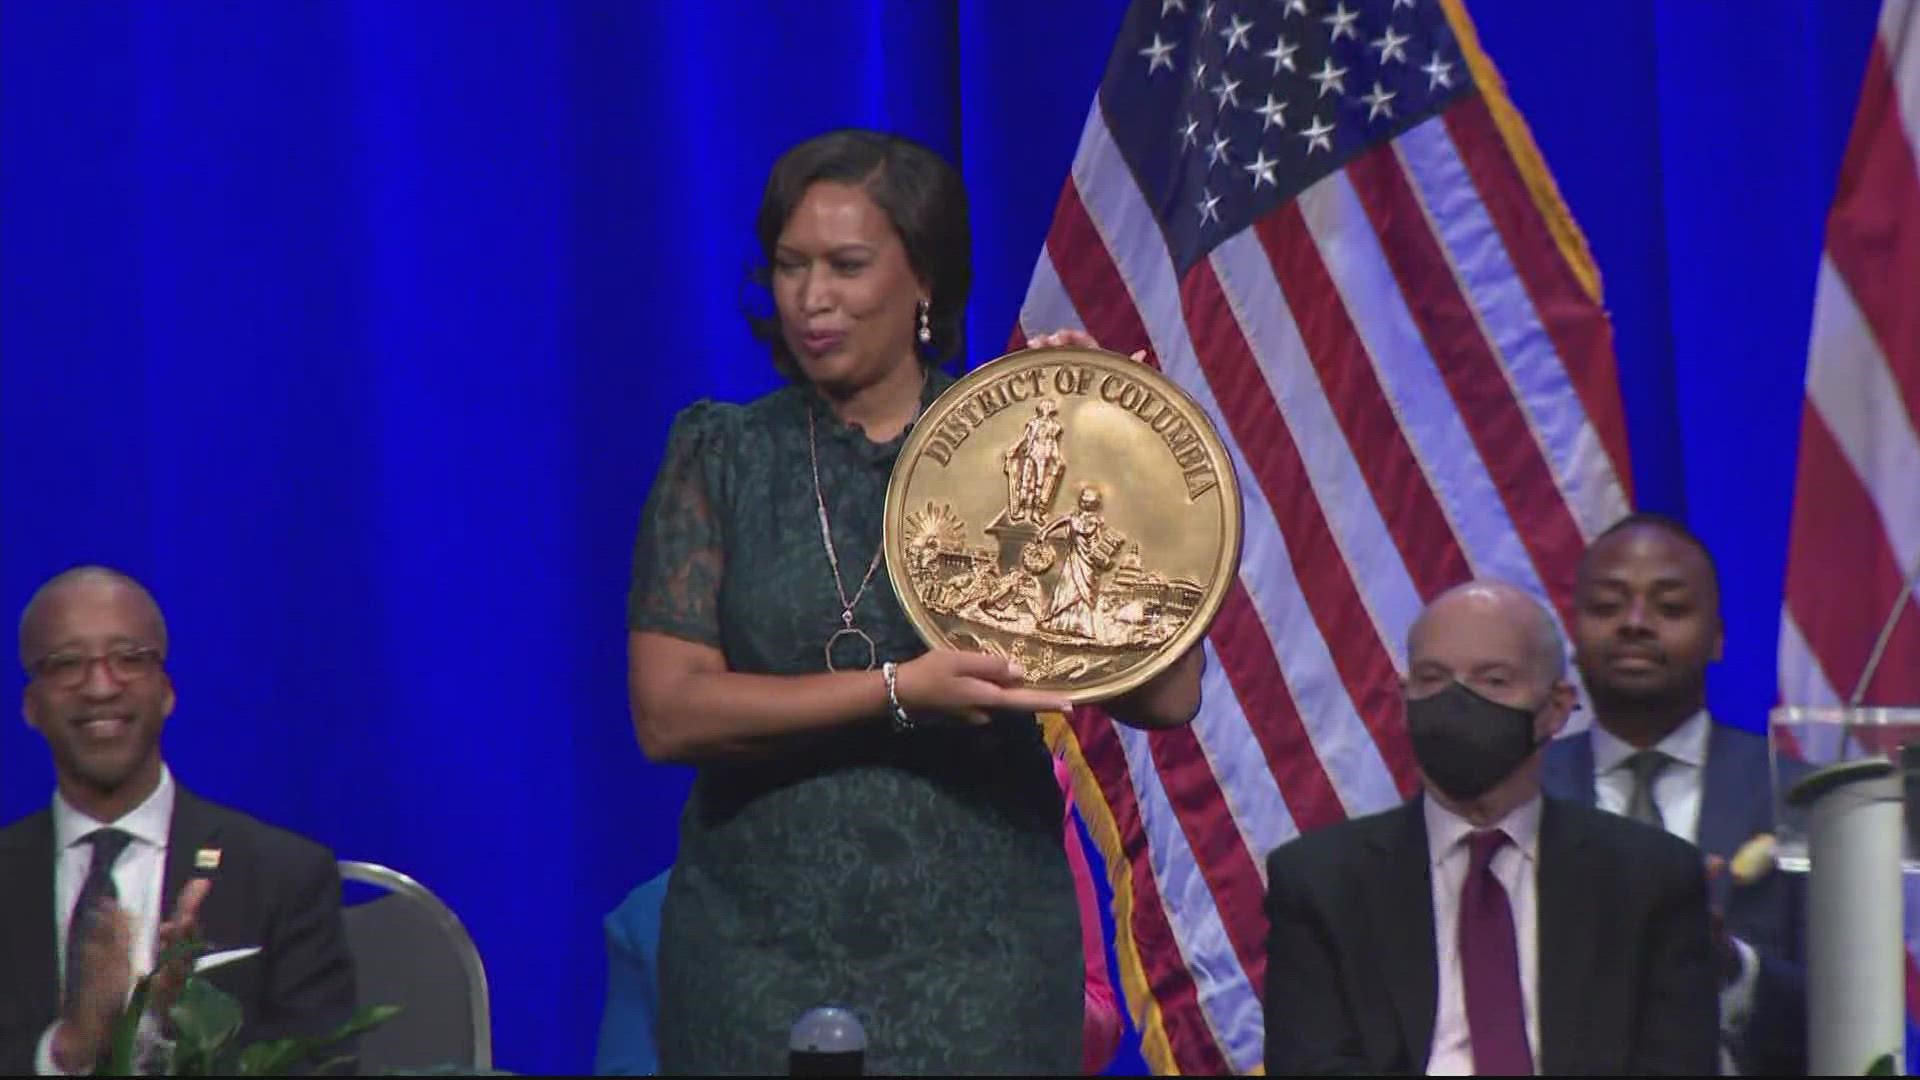 For the third time the DC native was sworn in as Mayor. Mayor Bowser is now the first to serve three terms since Marion Barry.